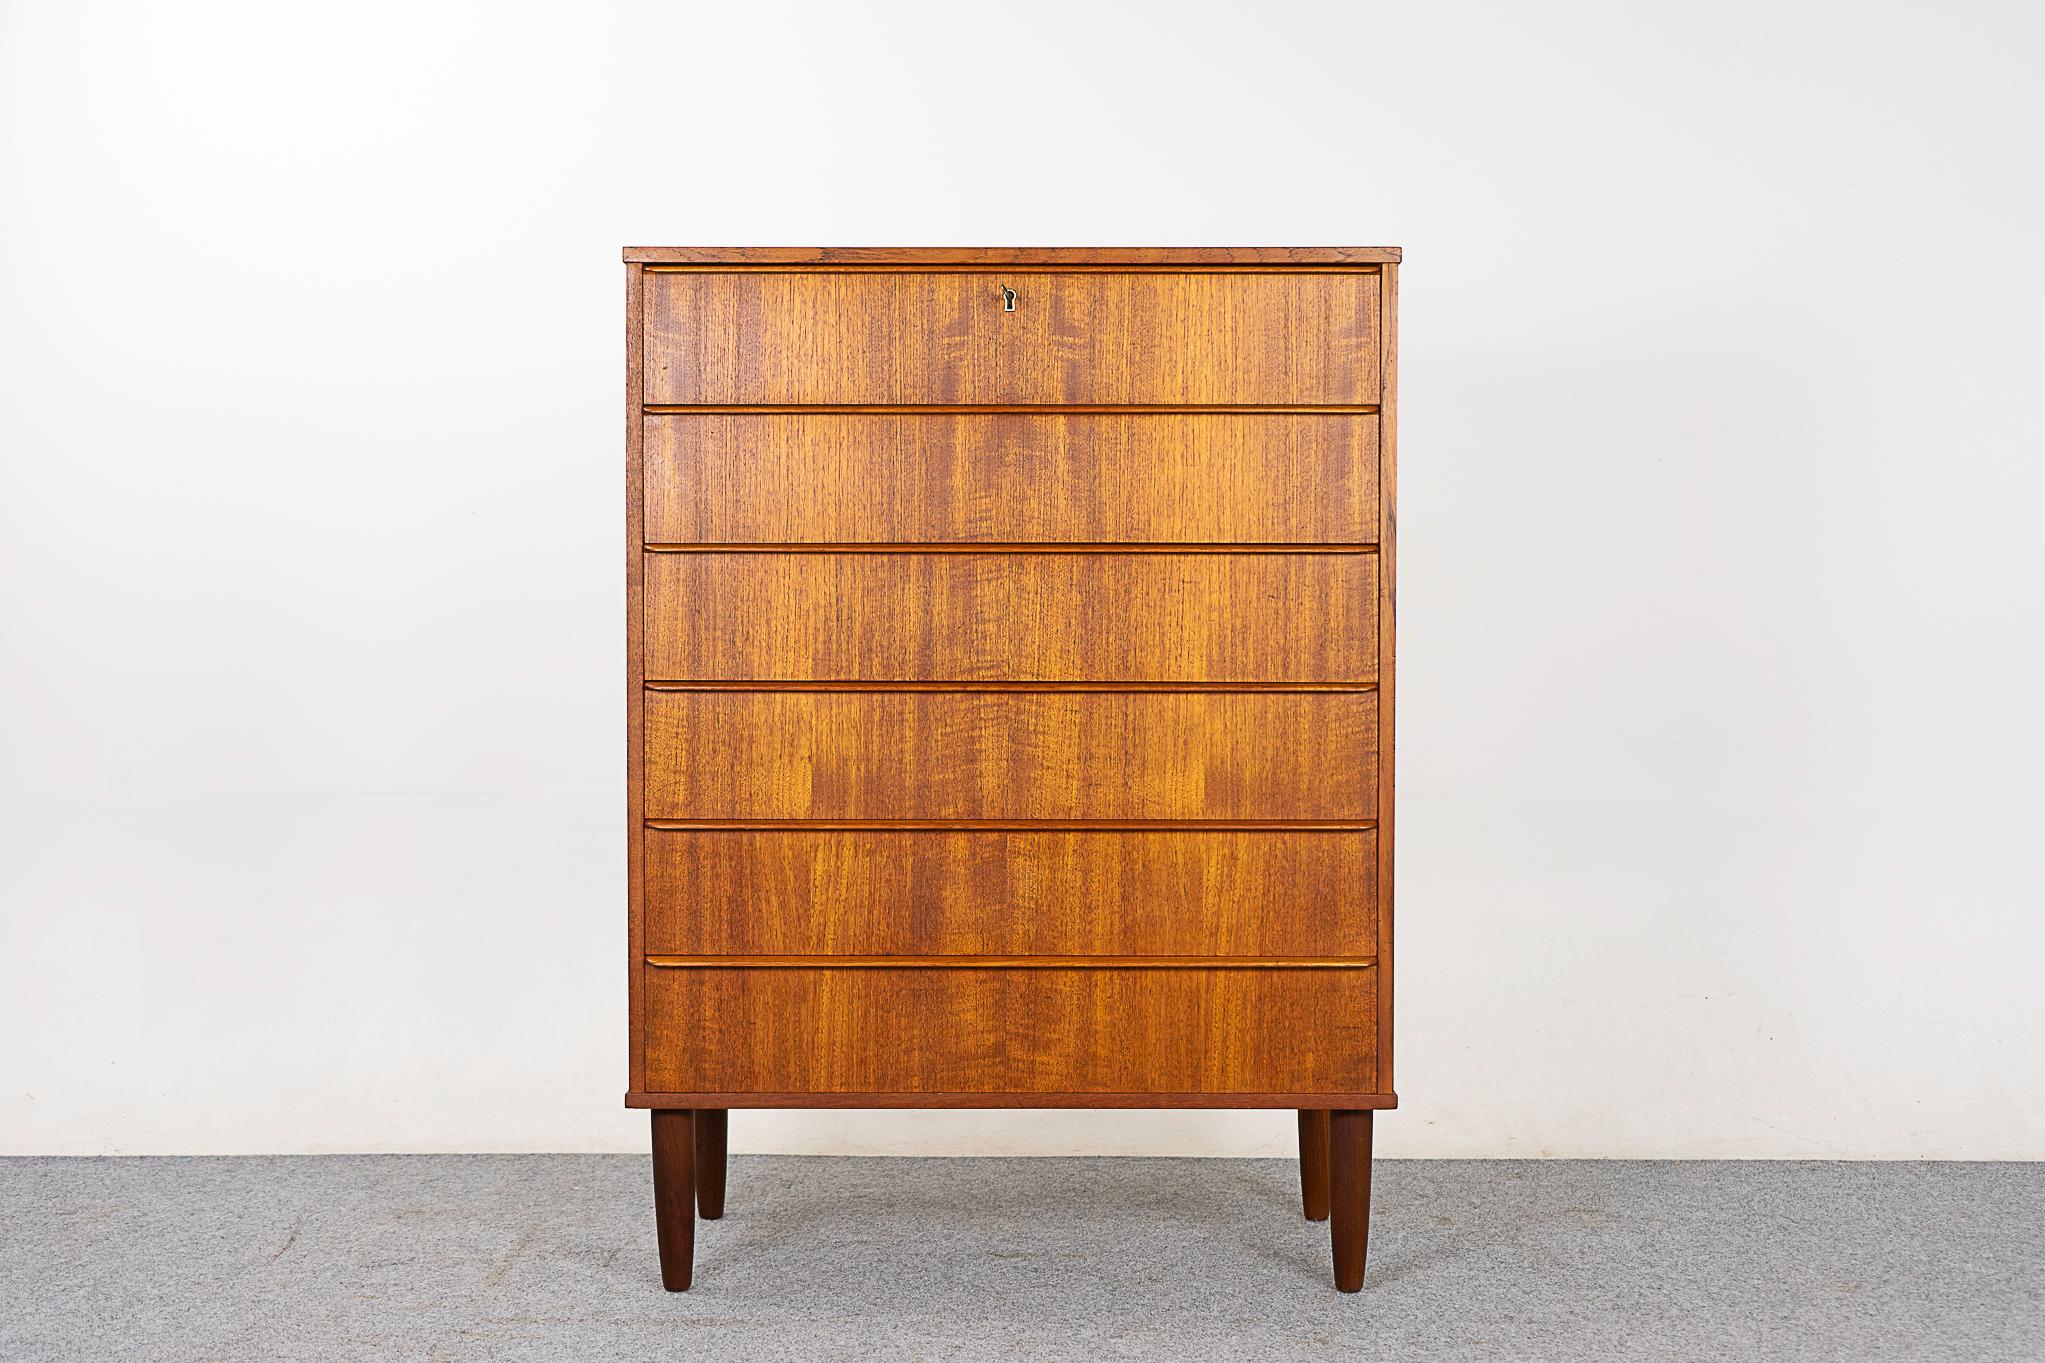 Teak midcentury highboy dresser, circa 1960s. Solid wood edging with stunning book-matched veneer on all drawer faces. Dovetail construction and integrated horizontal drawer pulls. Afromosia tapered legs. Darling!

Please inquire for international